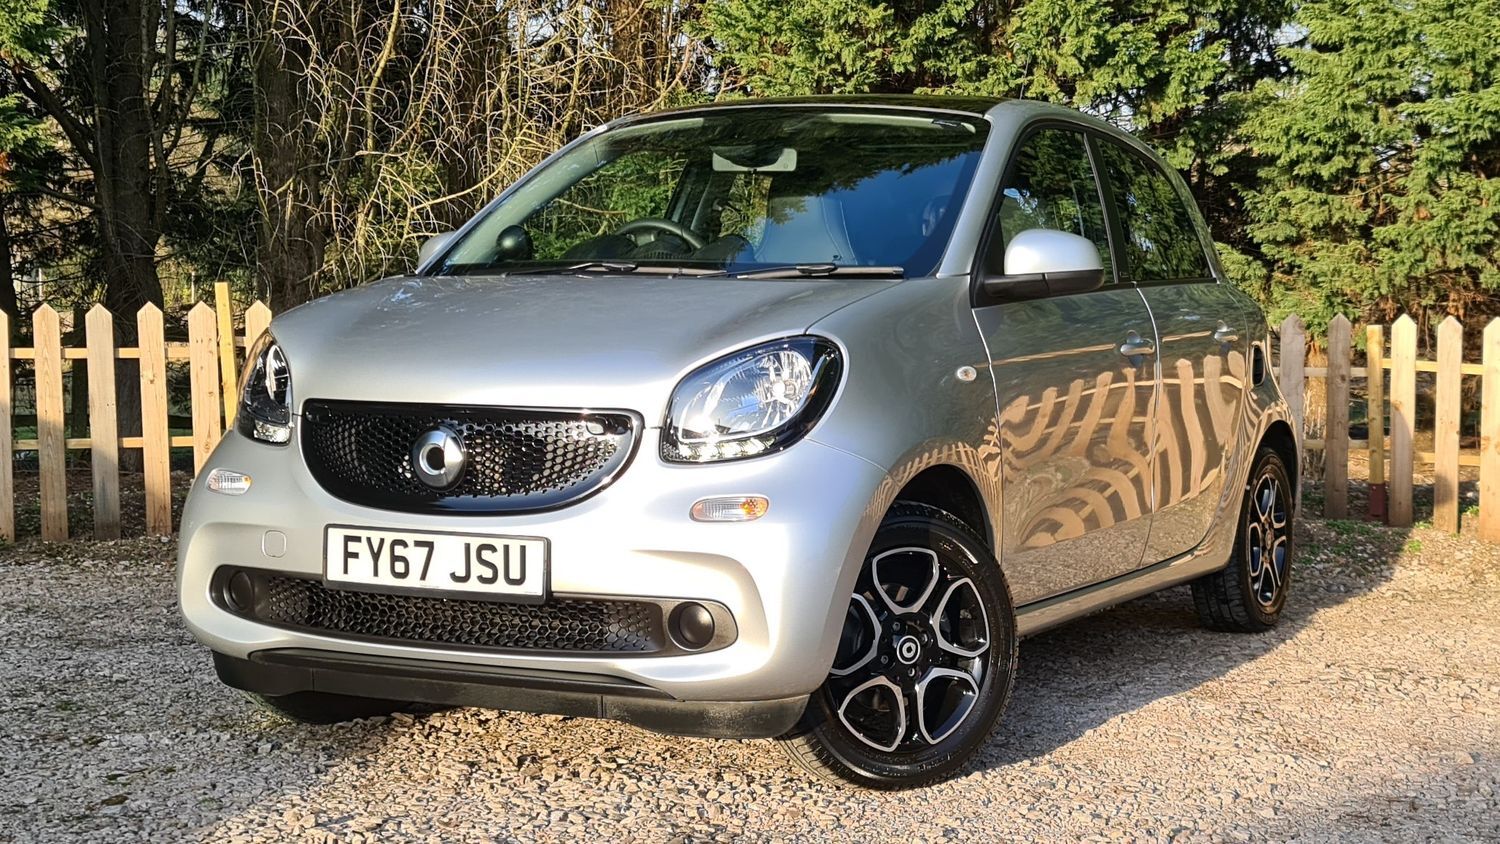 Used SMART FORFOUR in Cowfold, West Sussex | Andrew Shipp Autos